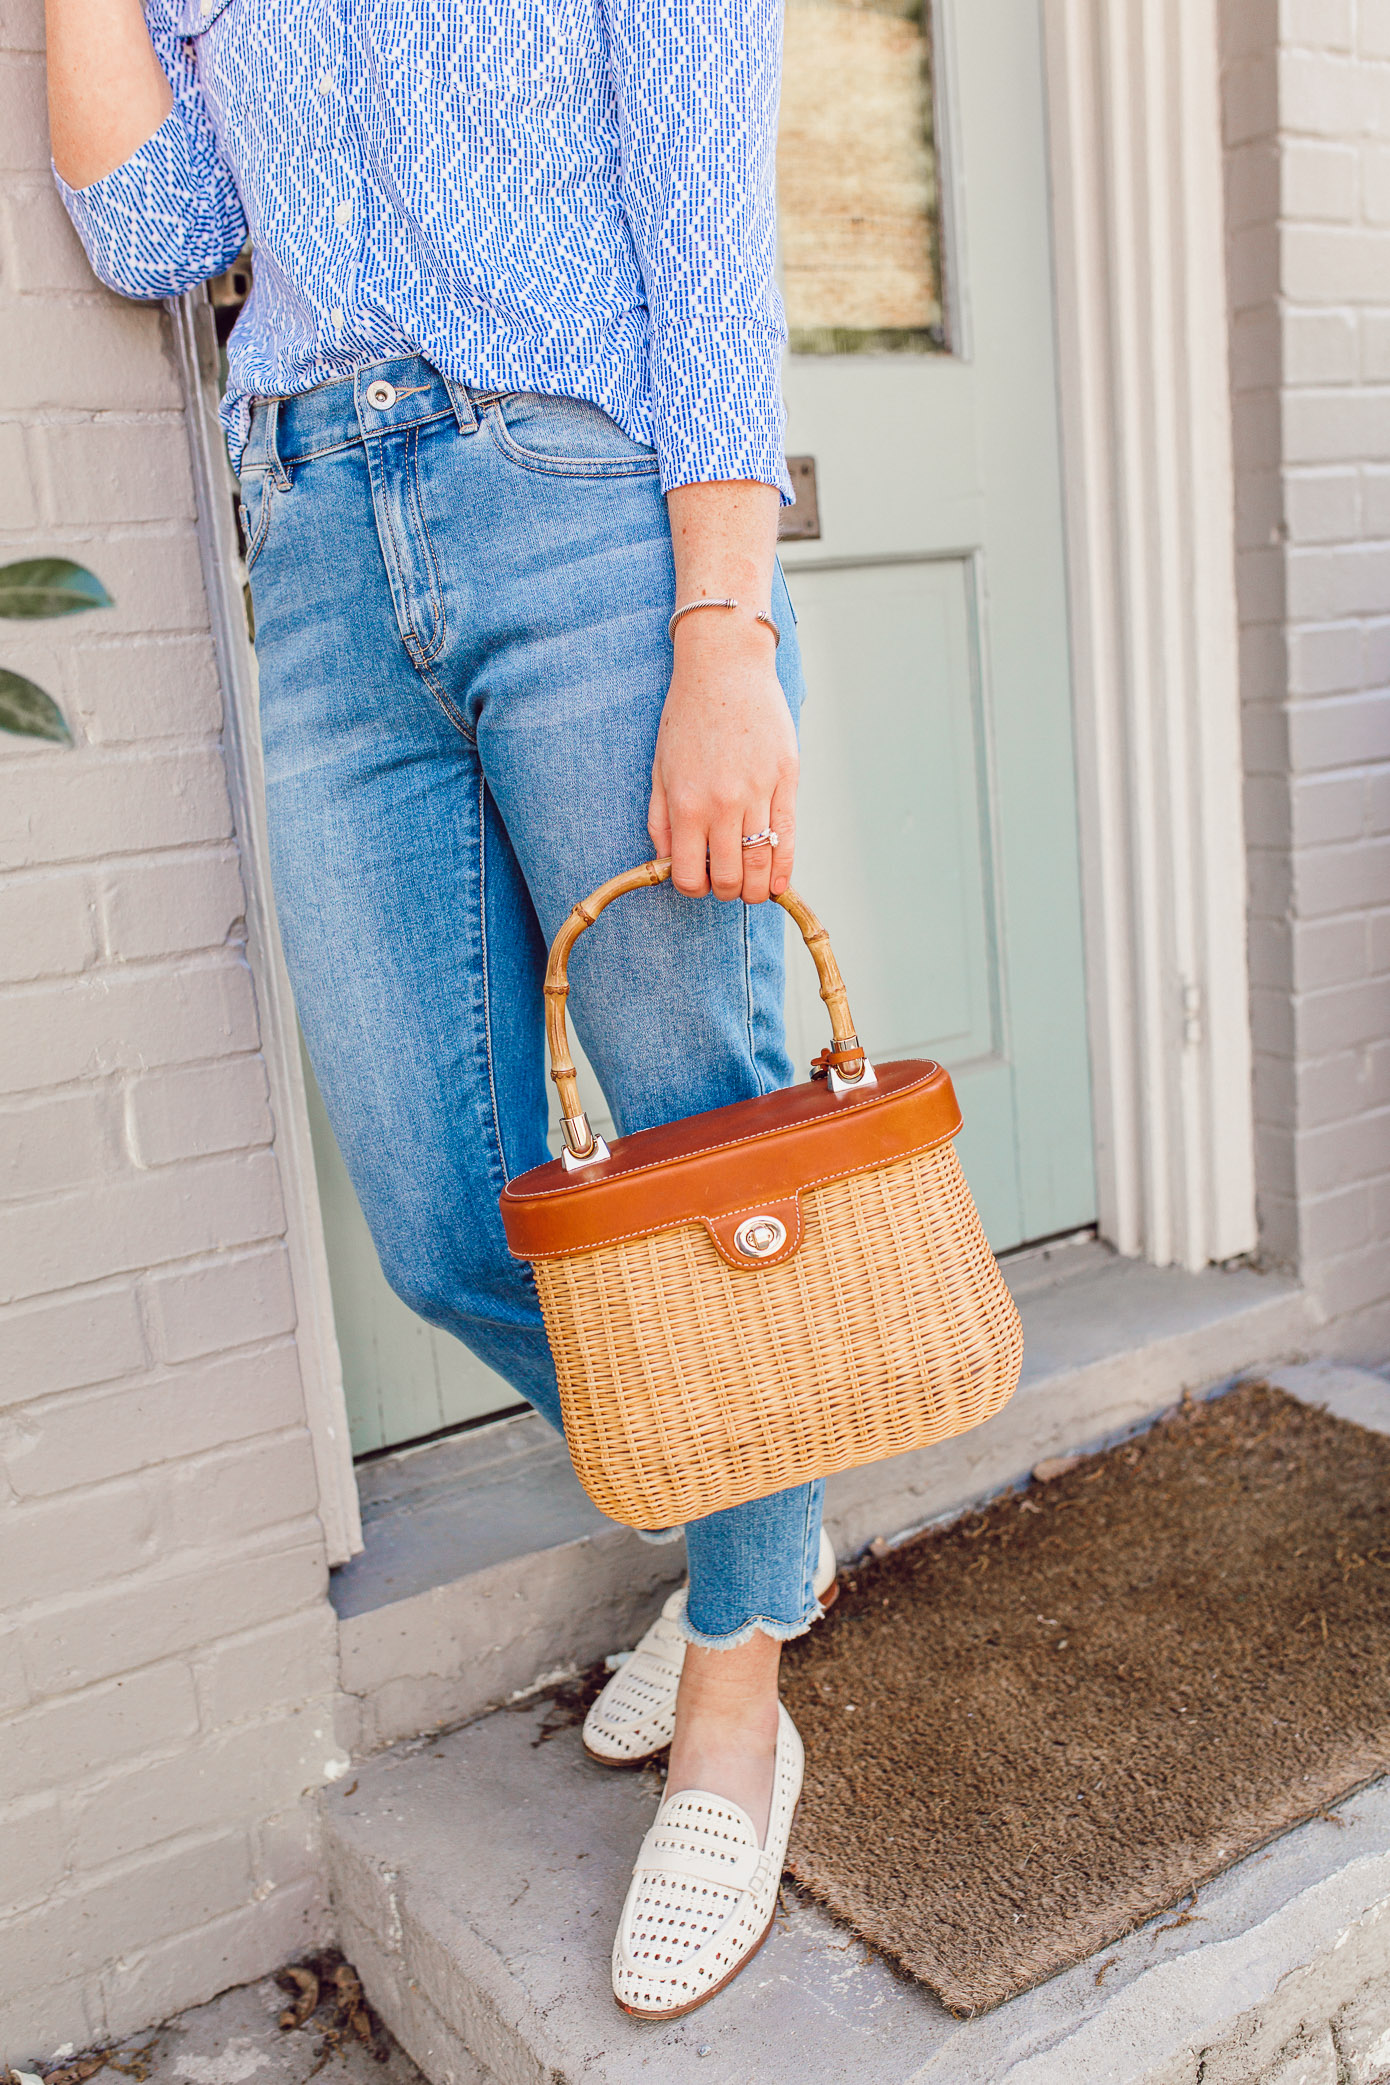 Scalloped Hem Jeans | Jeans for Spring 2019 | Louella Reese